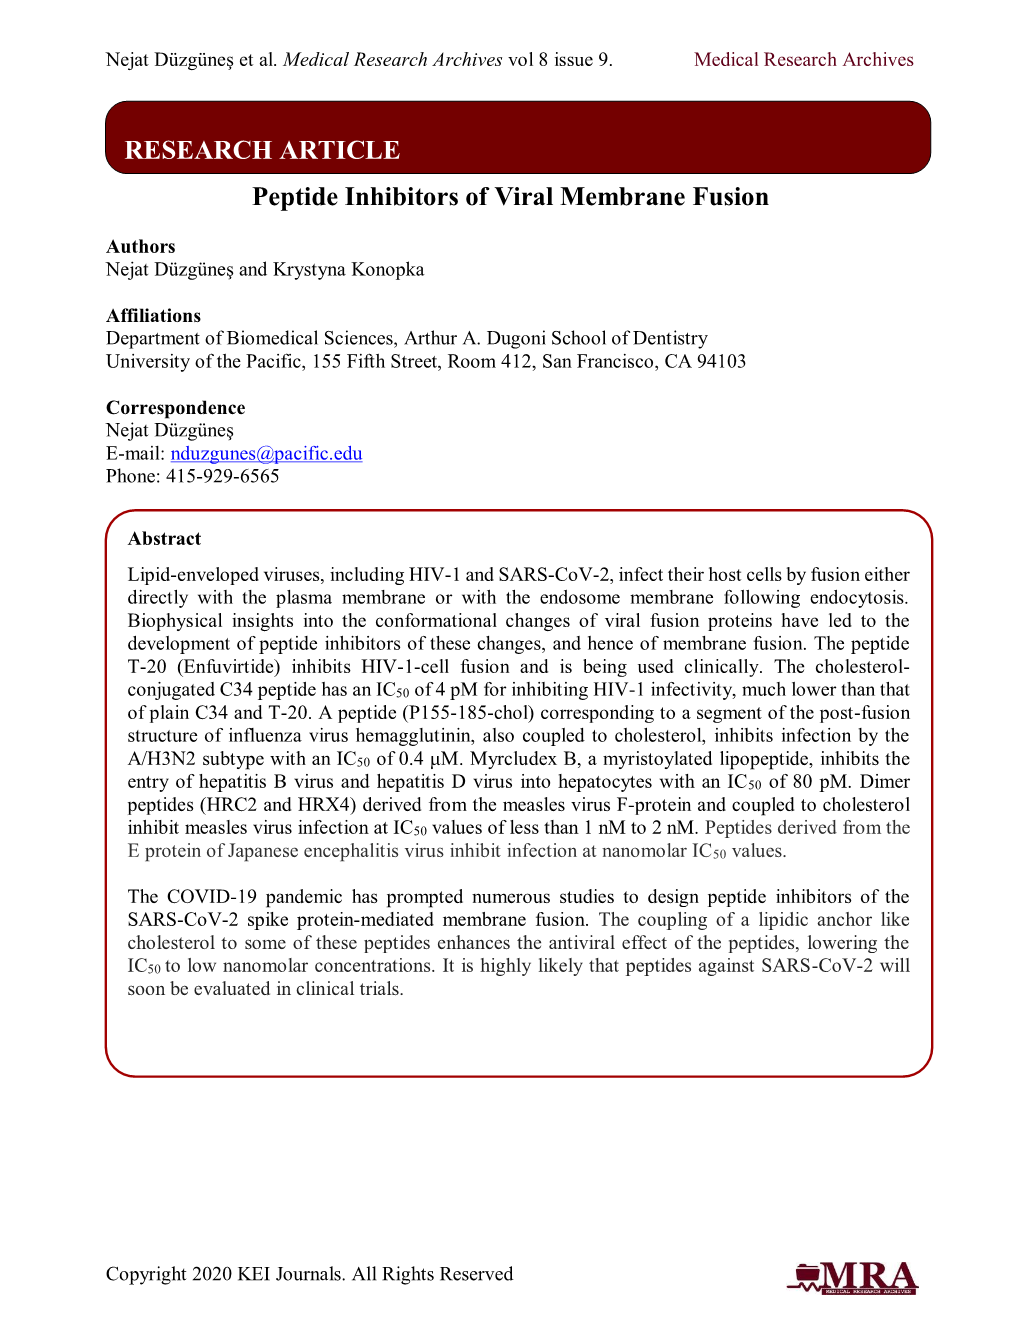 Peptide Inhibitors of Viral Membrane Fusion RESEARCH ARTICLE